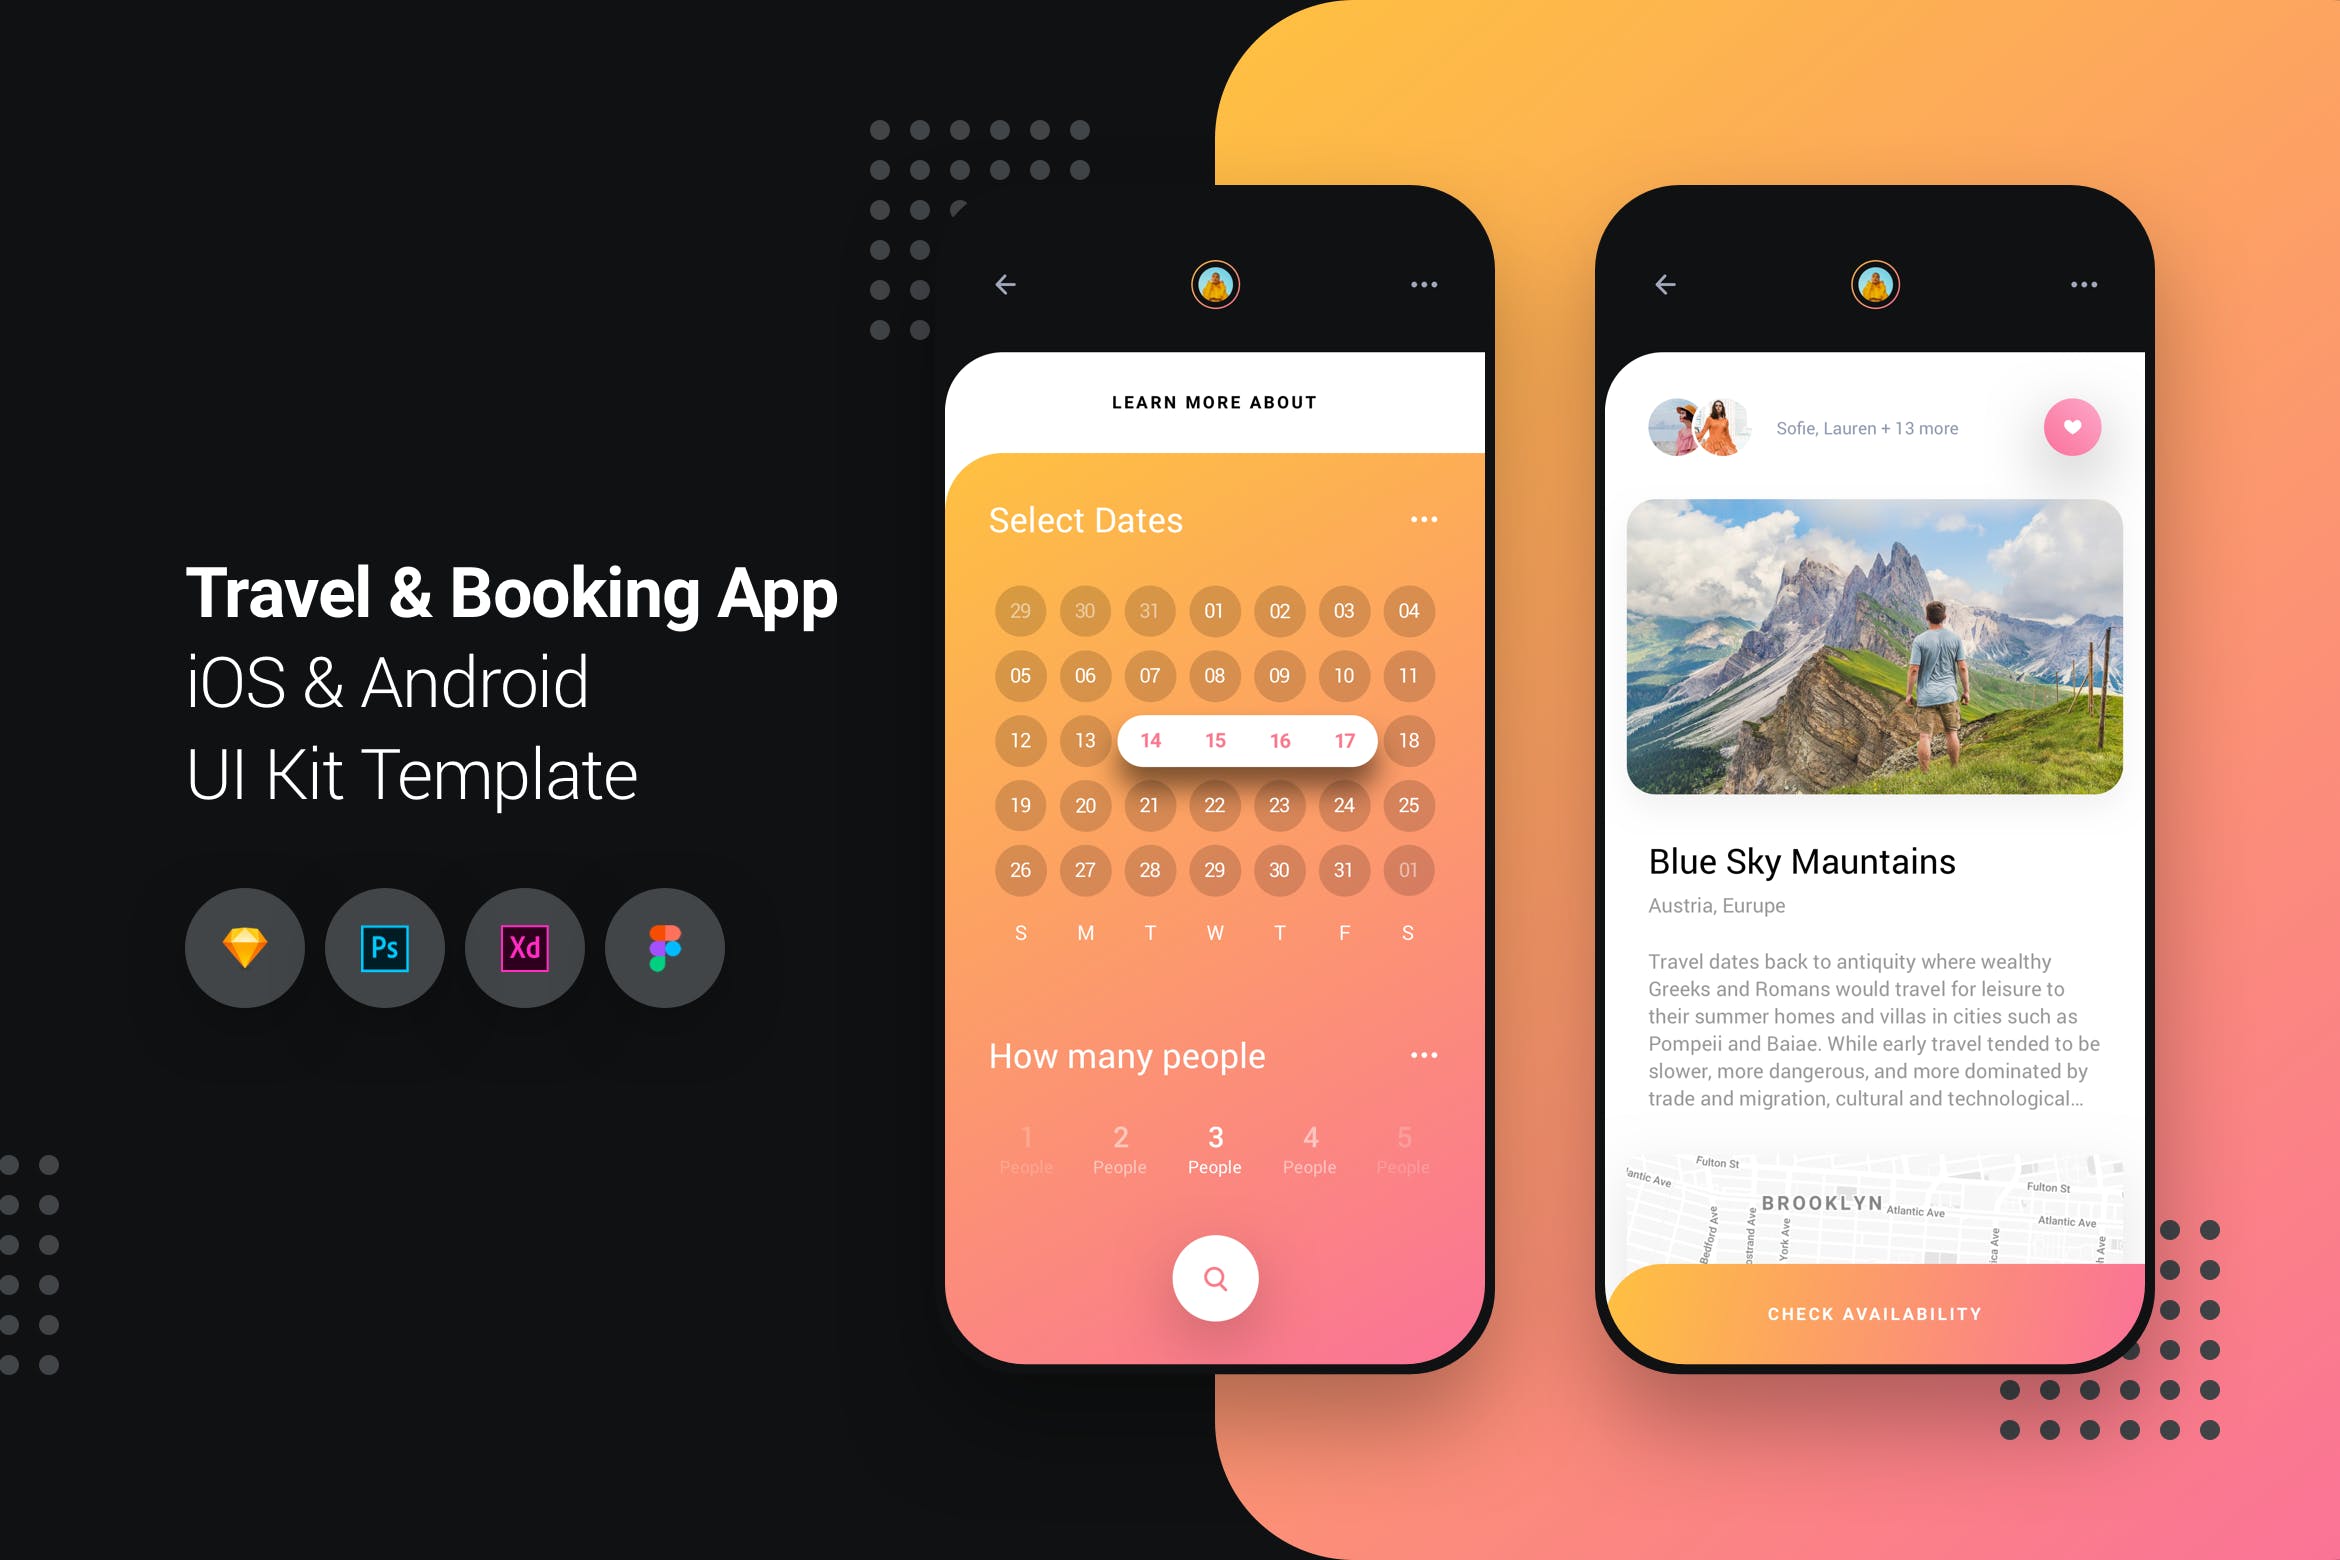 iOS&Android手机旅游&酒店预订APP应用UI套件模板 Travel & Booking App iOS & Android UI Kit Template插图